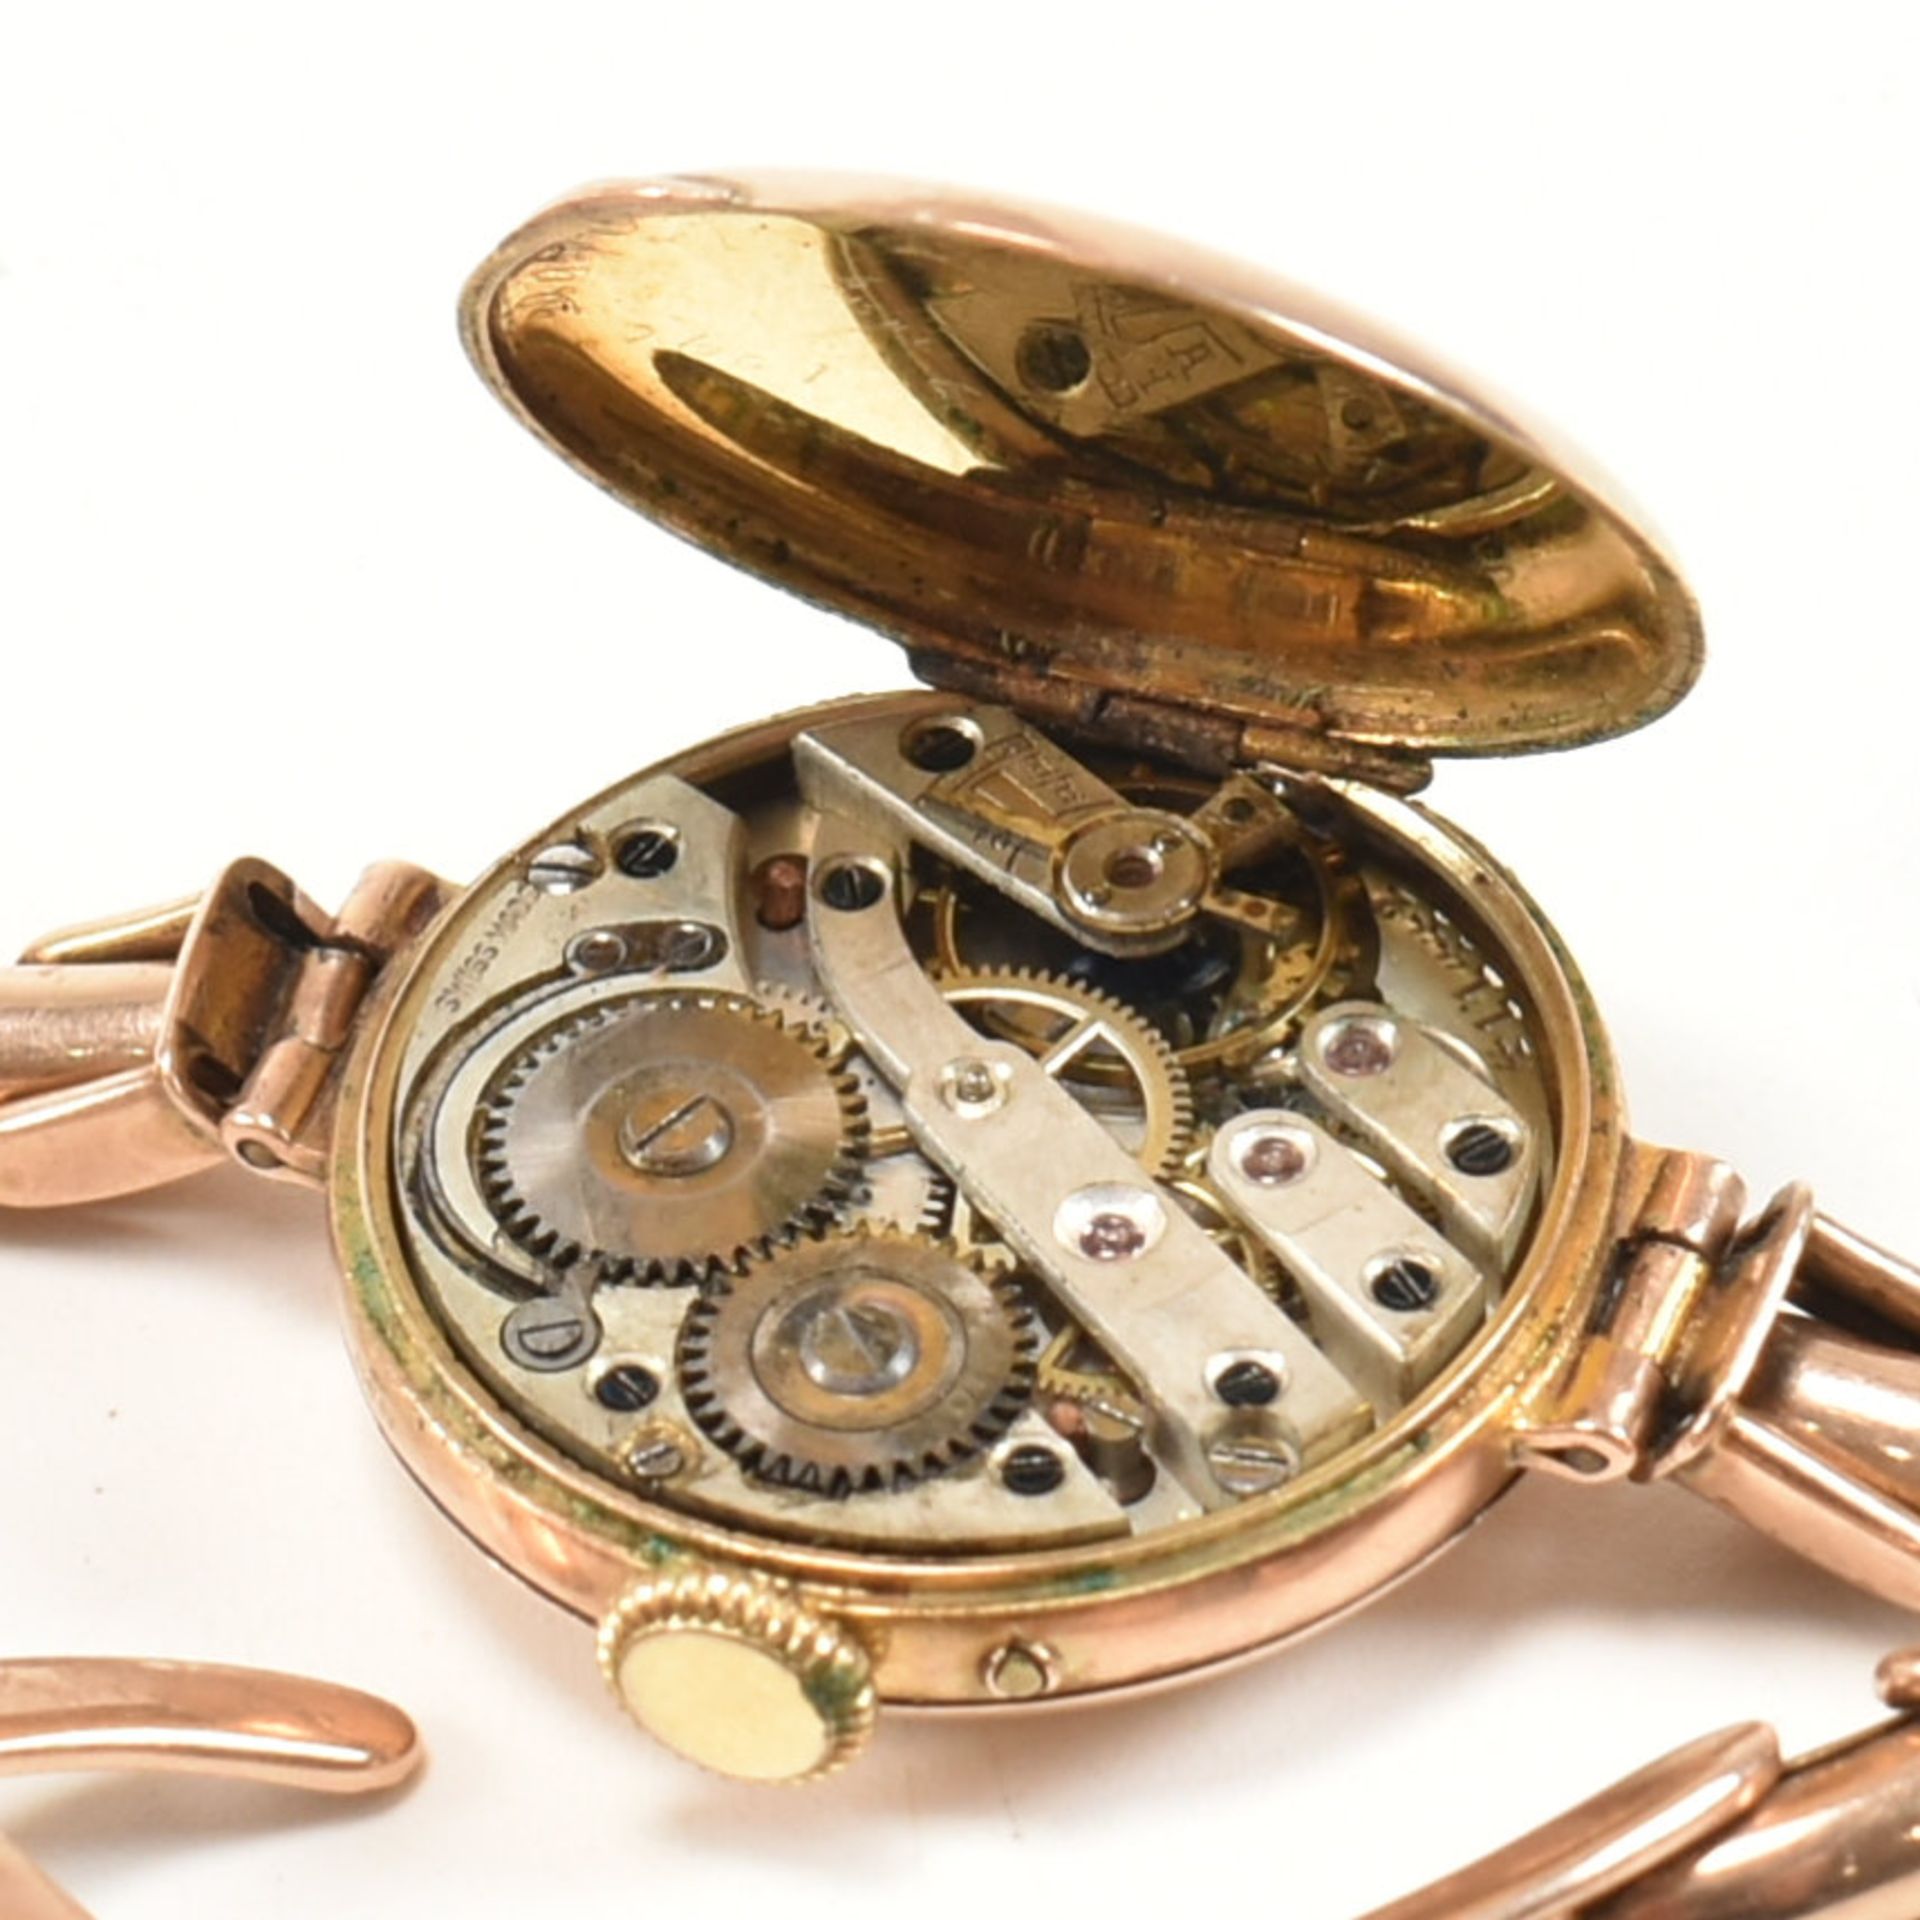 EARLY 20TH CENTURY 9CT GOLD LADIES DRESS WRISTWATCH - Image 4 of 7